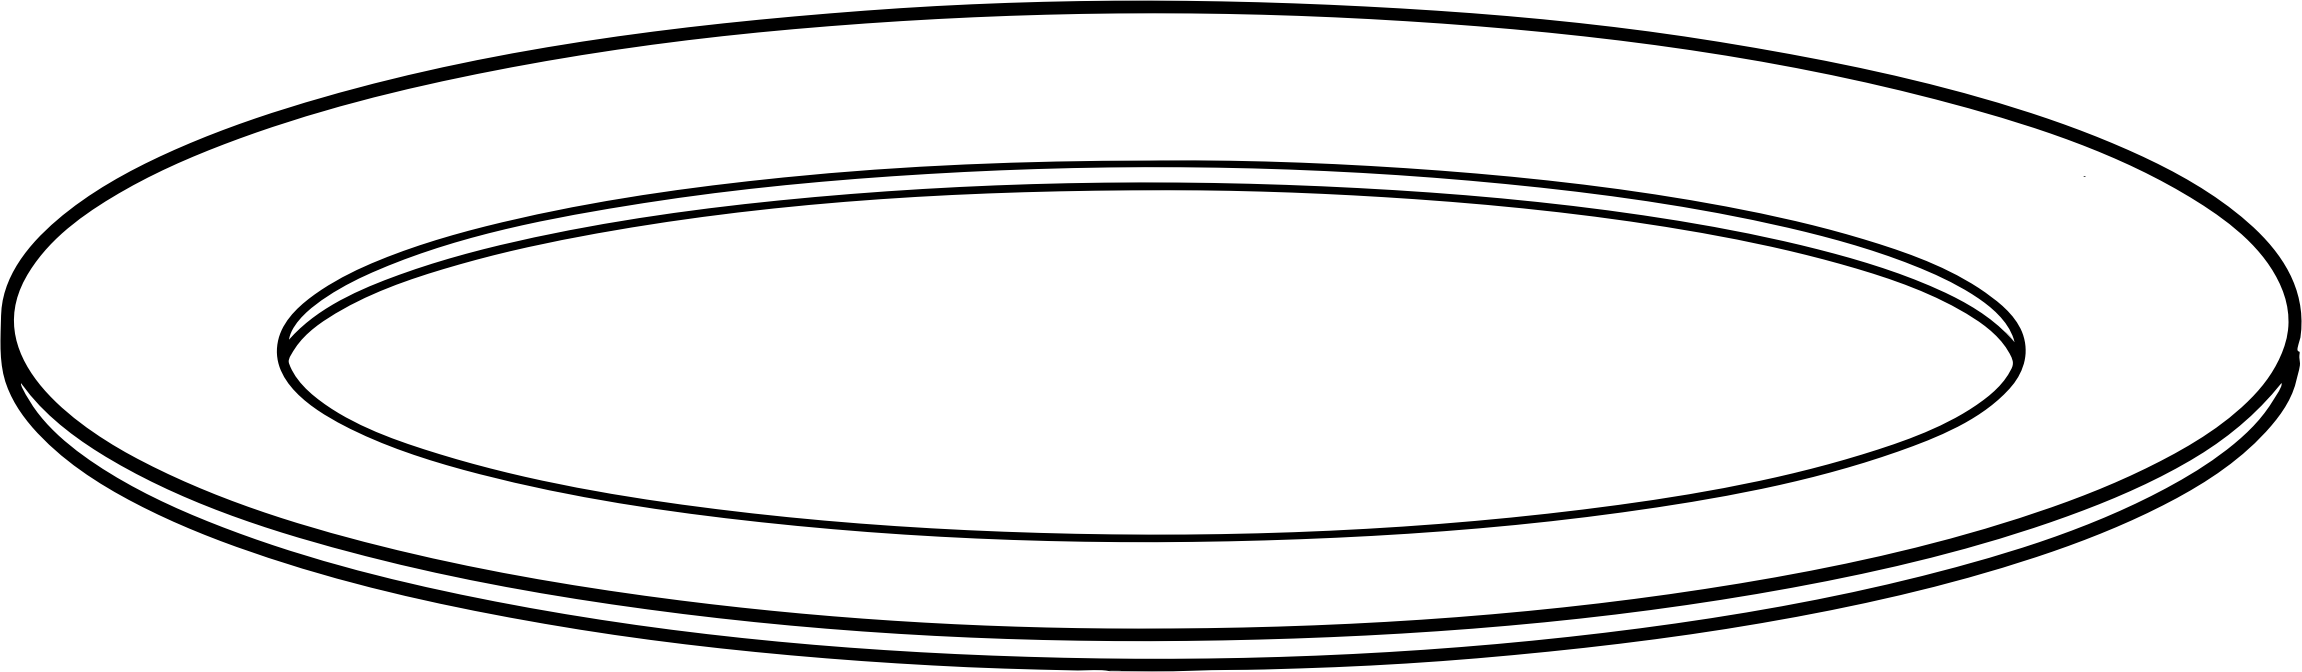 dish clipart plate outline